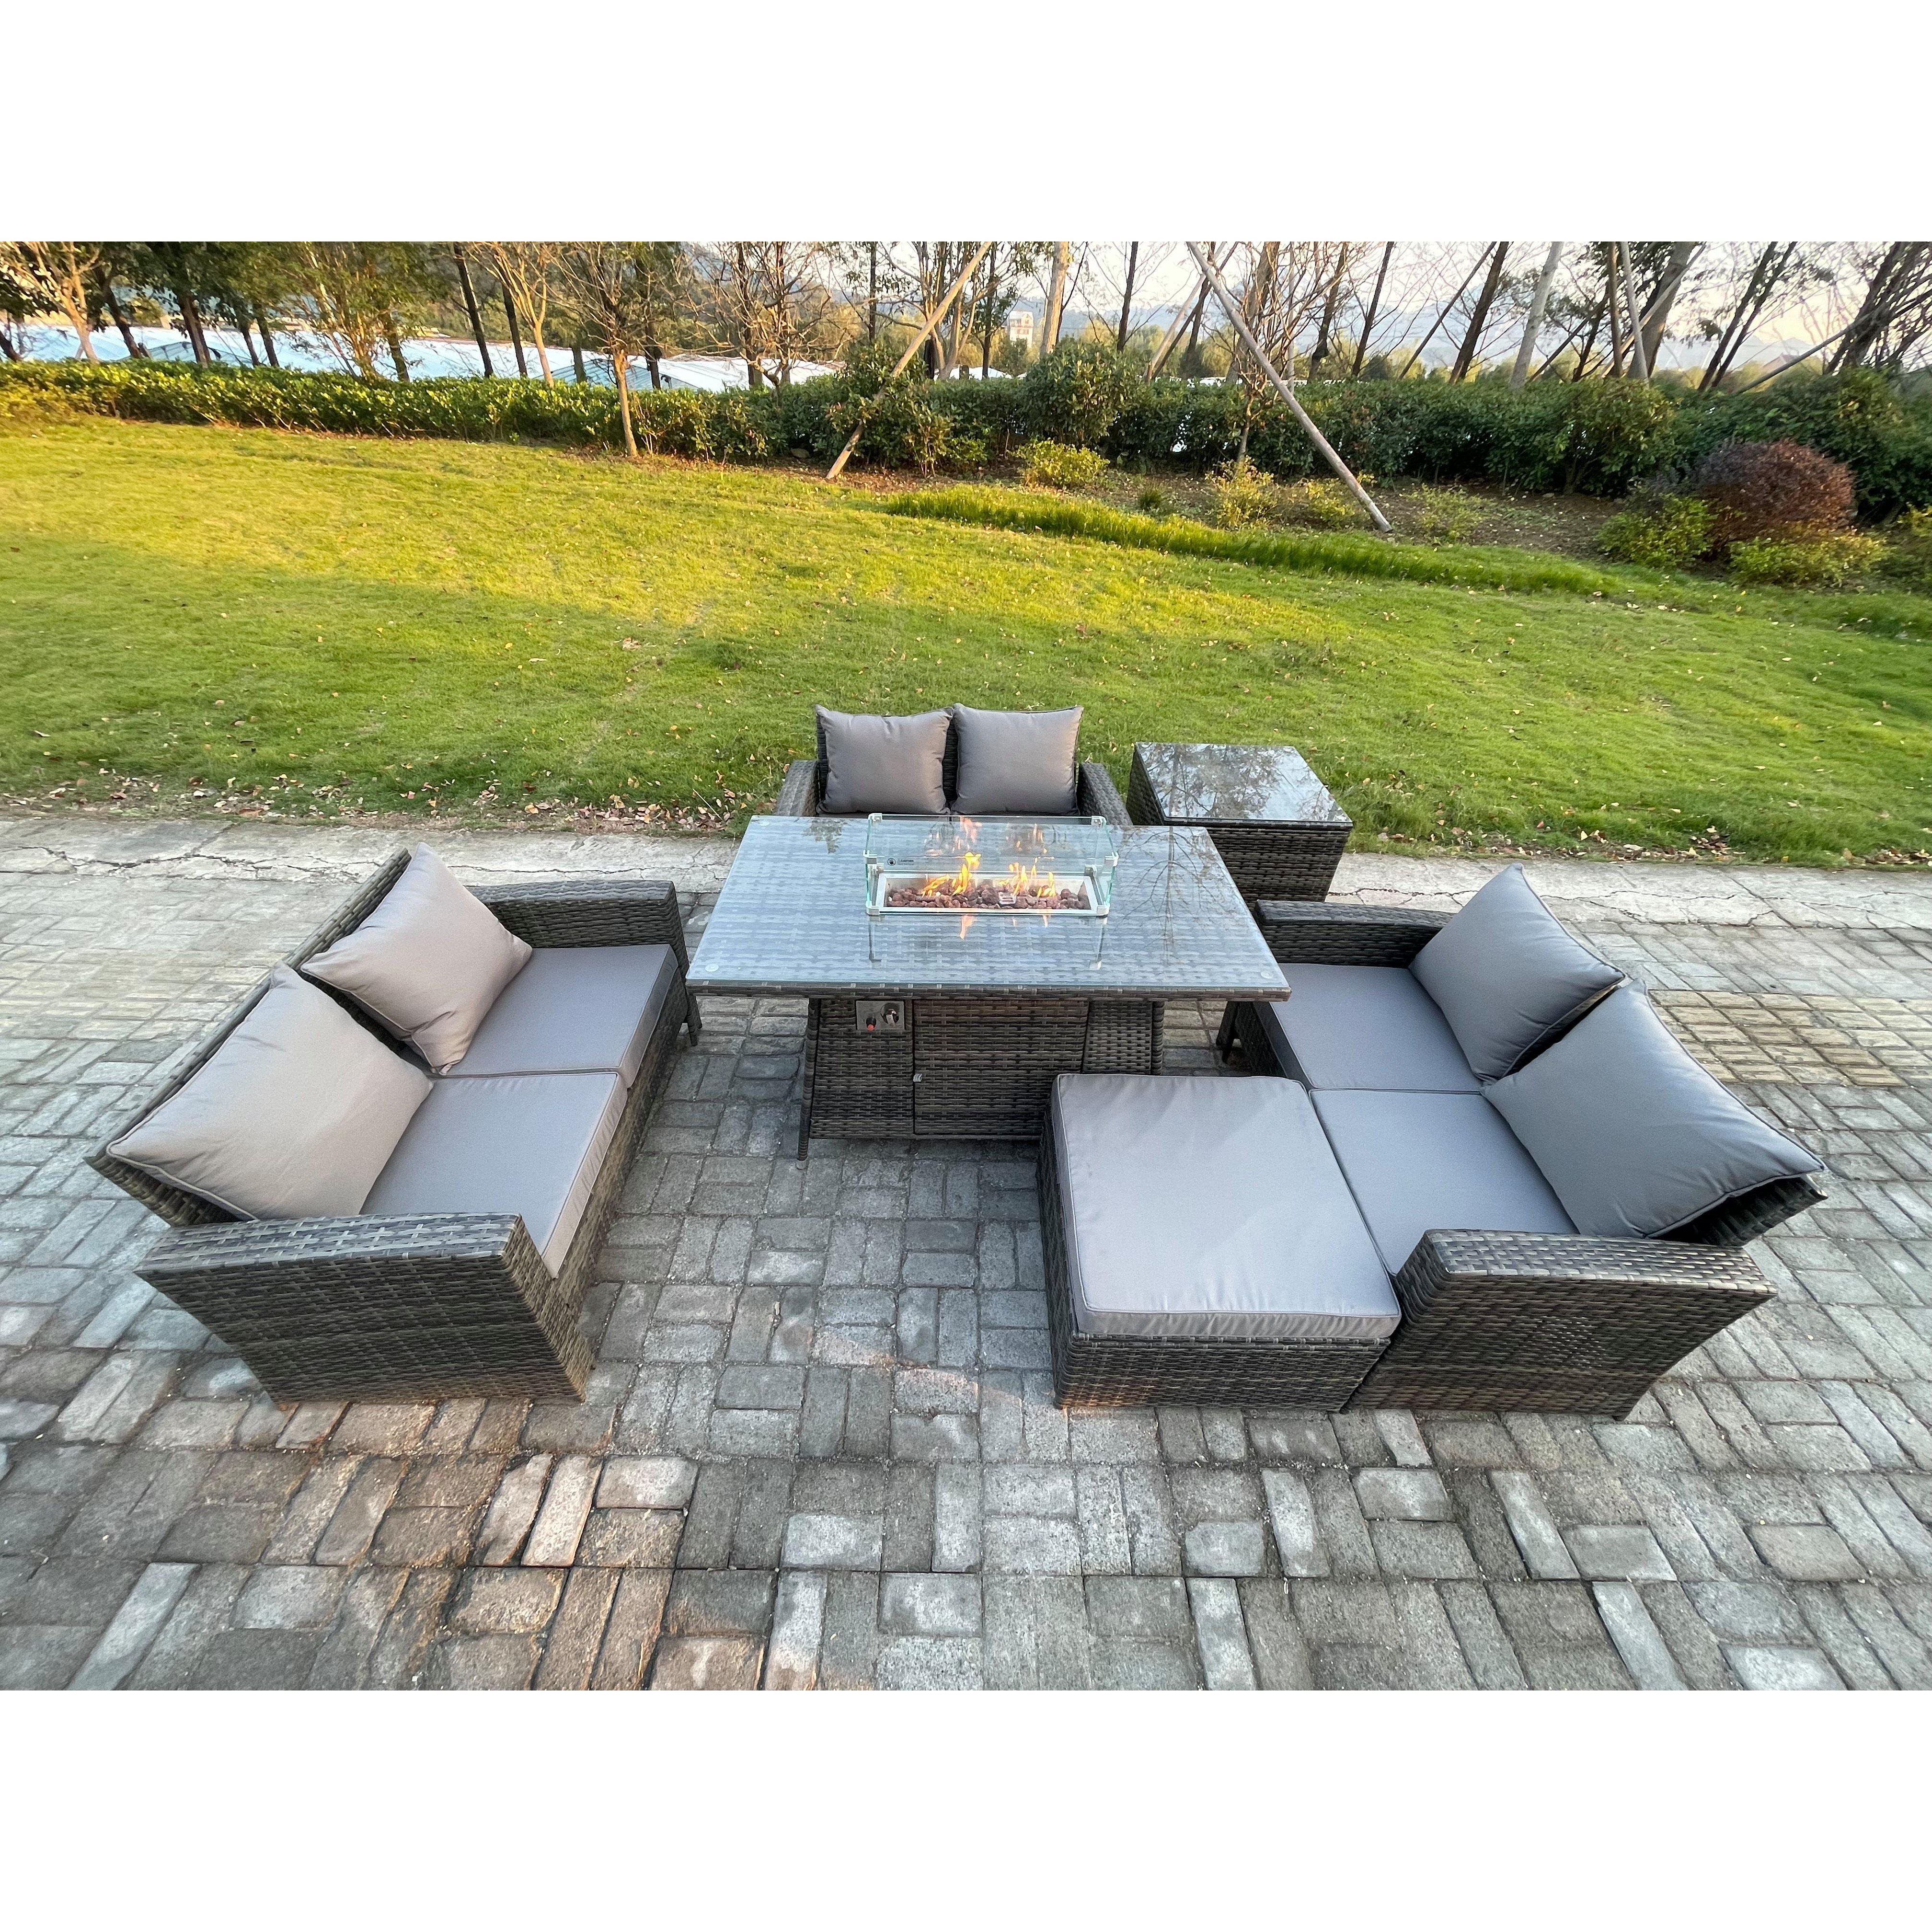 Outdoor Garden Dining Sets 7 Seater Rattan Patio Furniture Sofa Set with Gas Firepit Table Double Seat Sofa Side Table - image 1